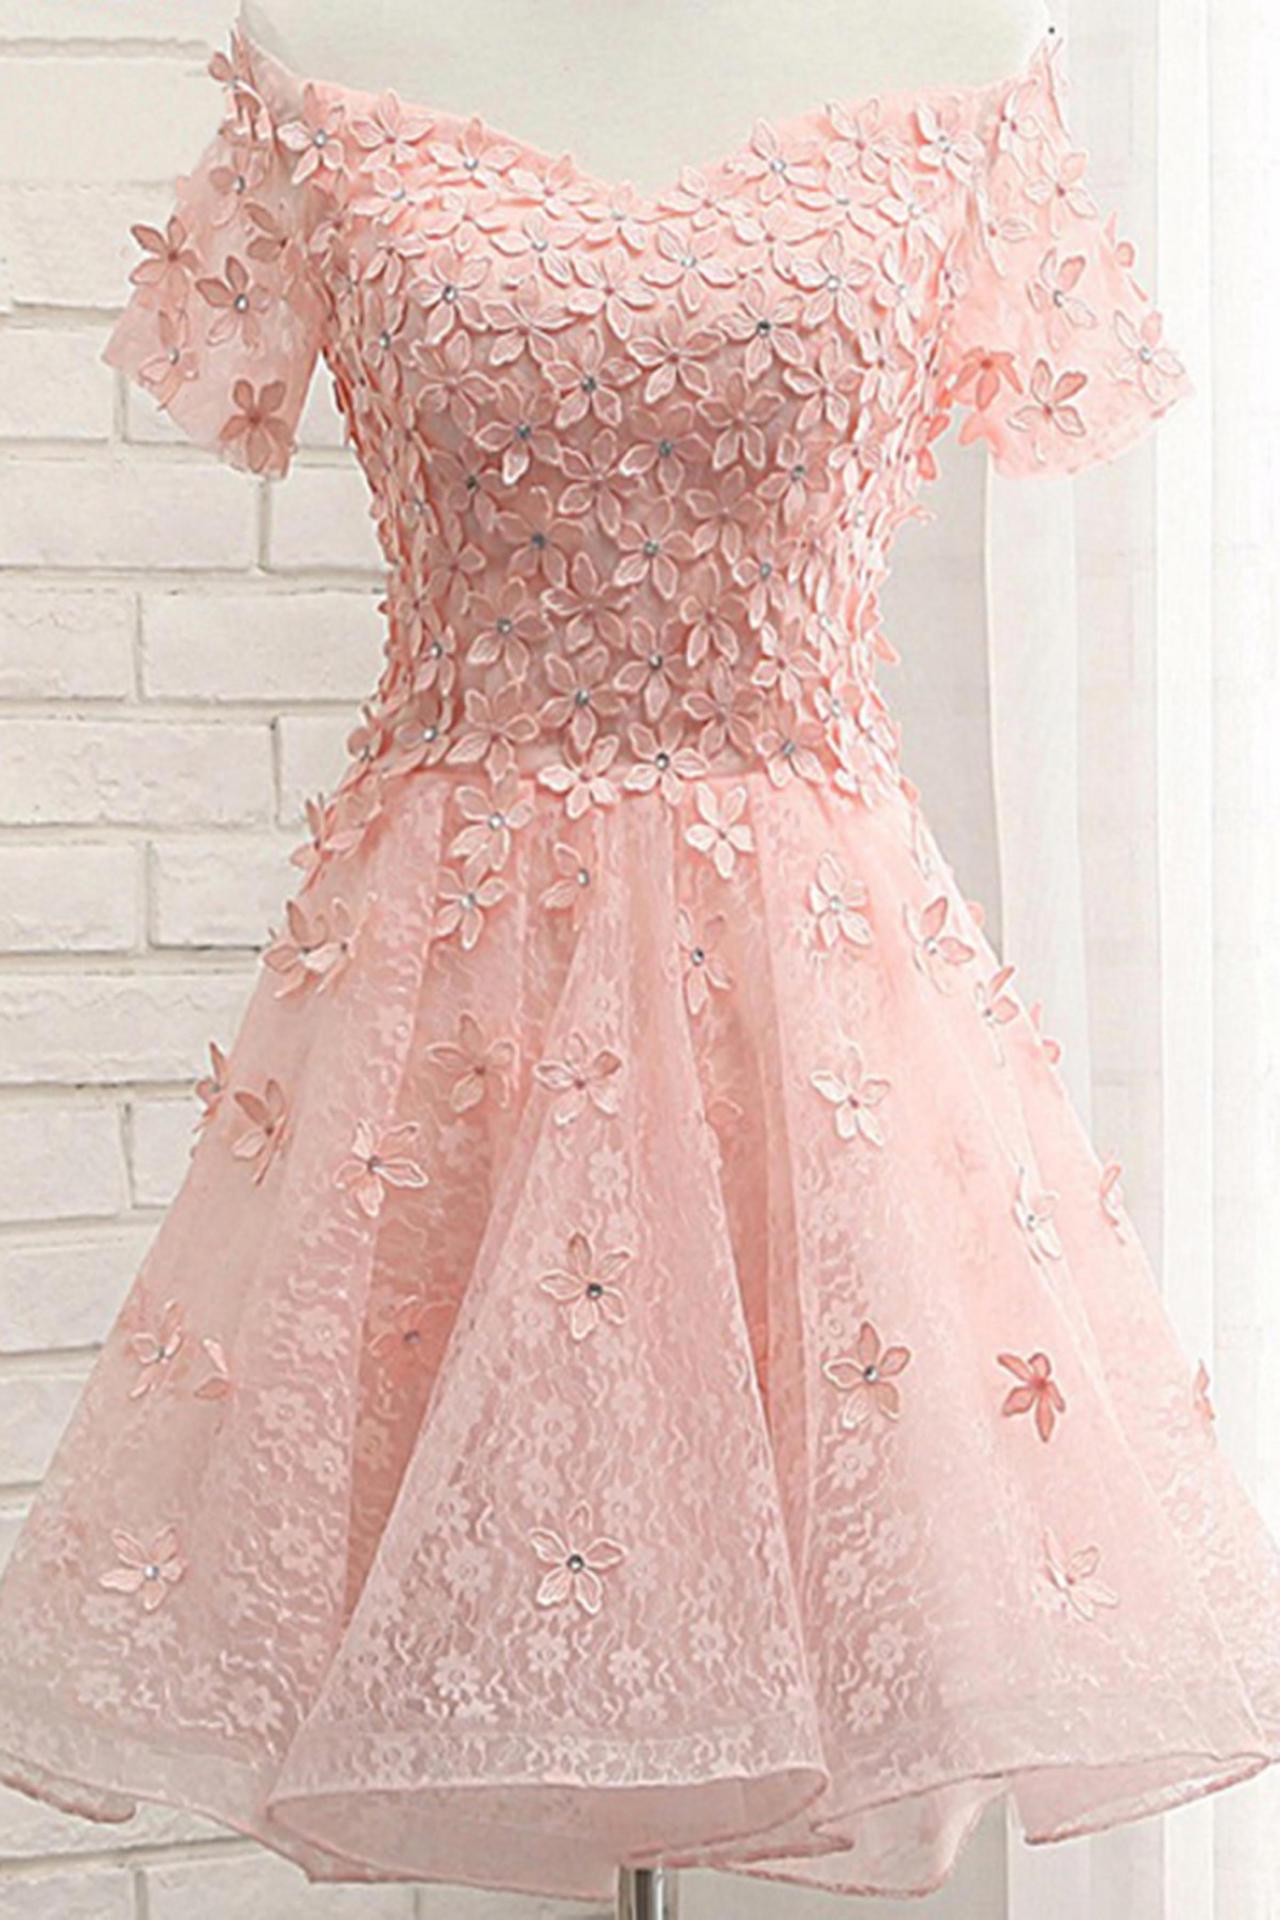 Pink Tulle Lace Off Shoulder Short Sleeve Homecoming Dress With Applique,party Dress